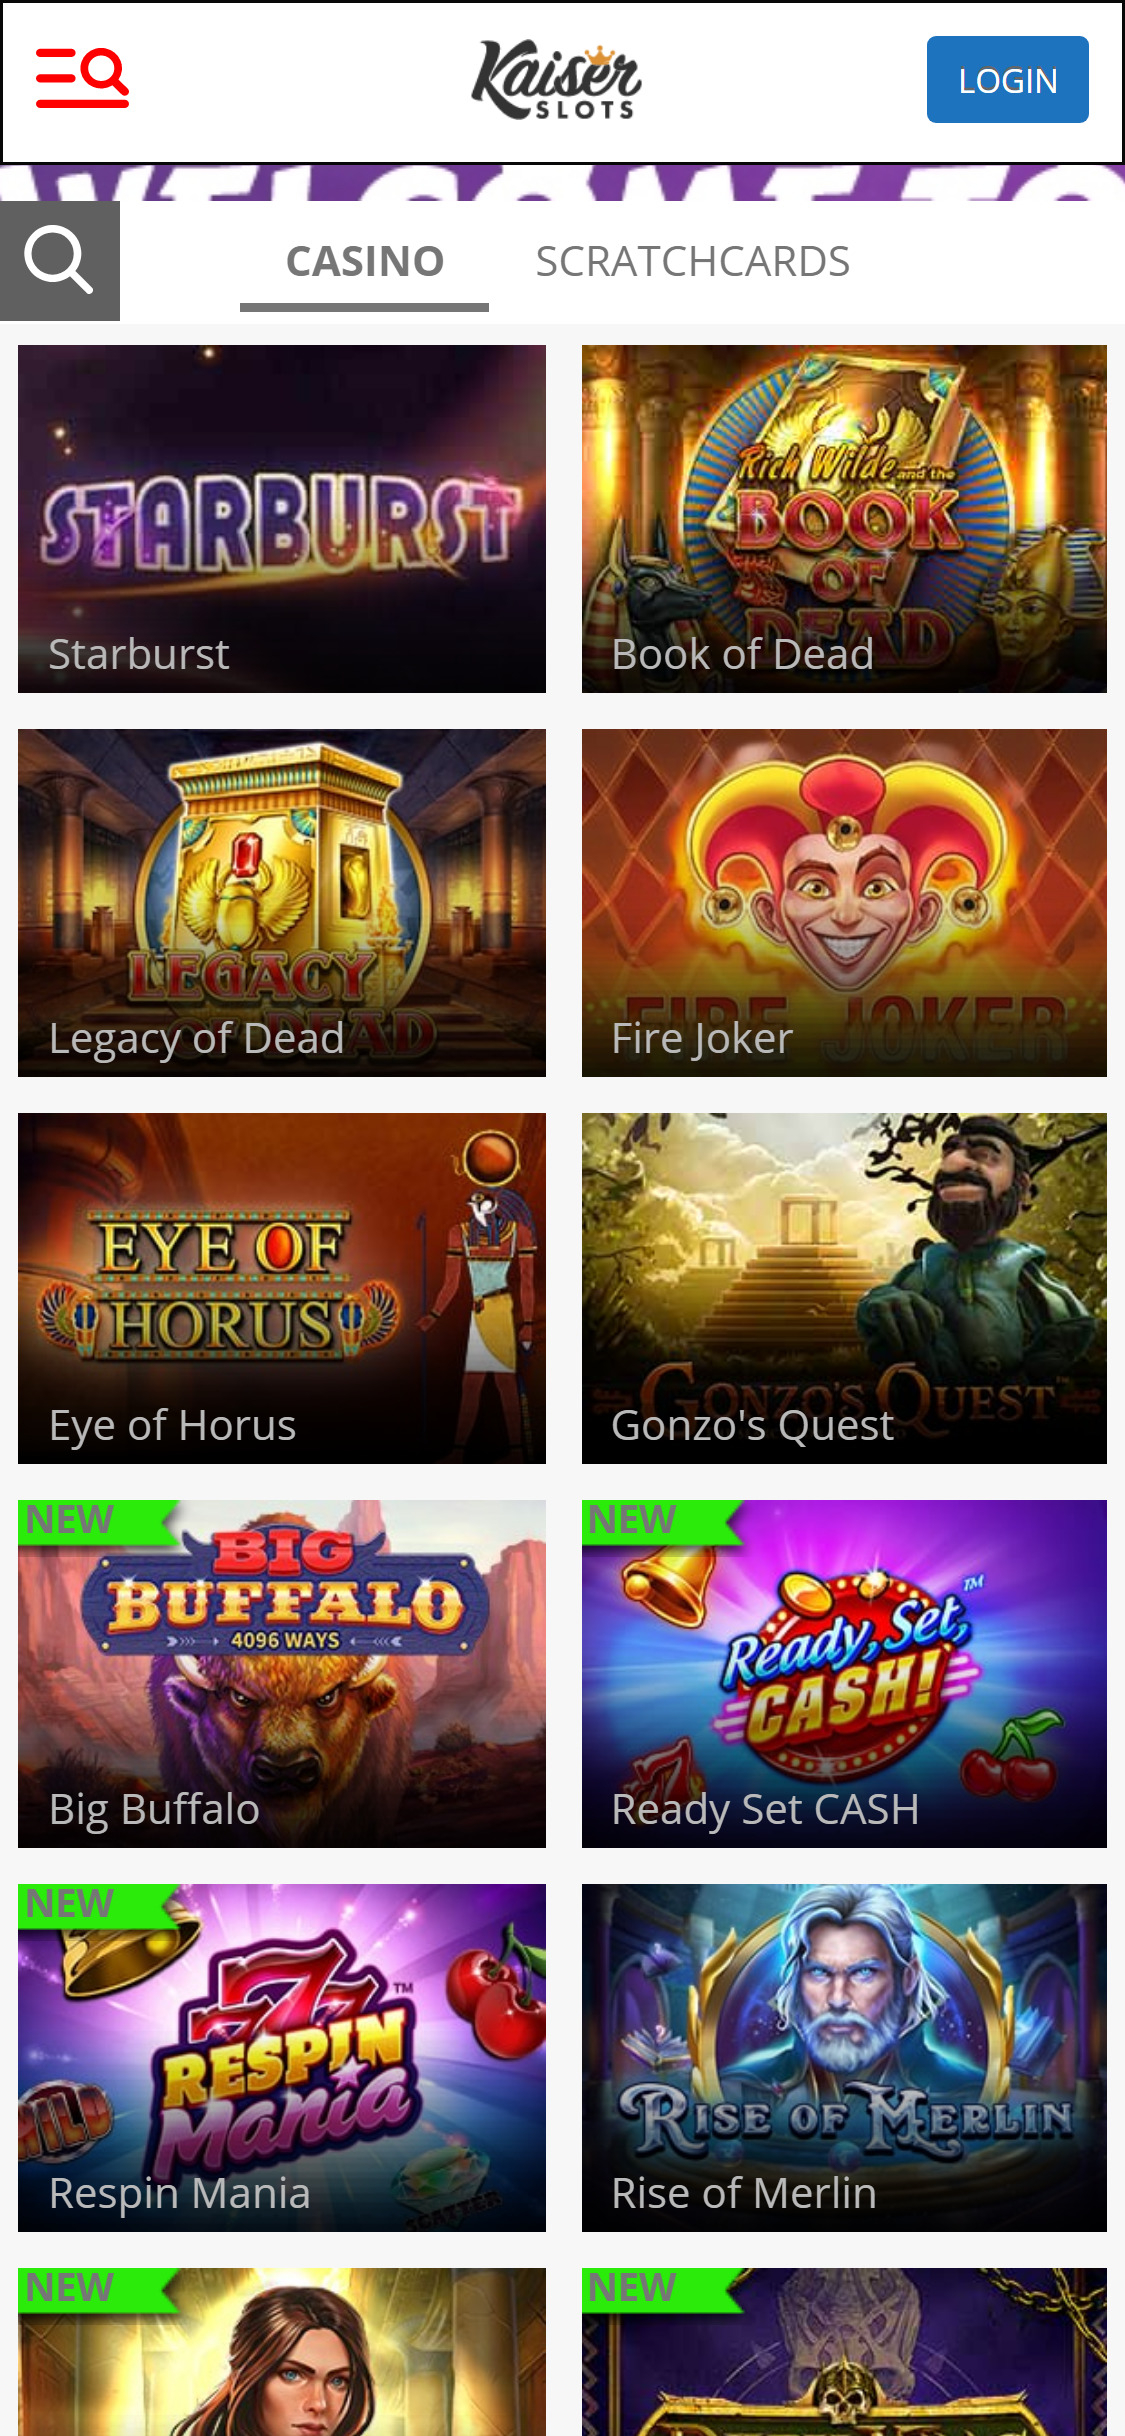 Kaiser Slots Casino Mobile Games Review